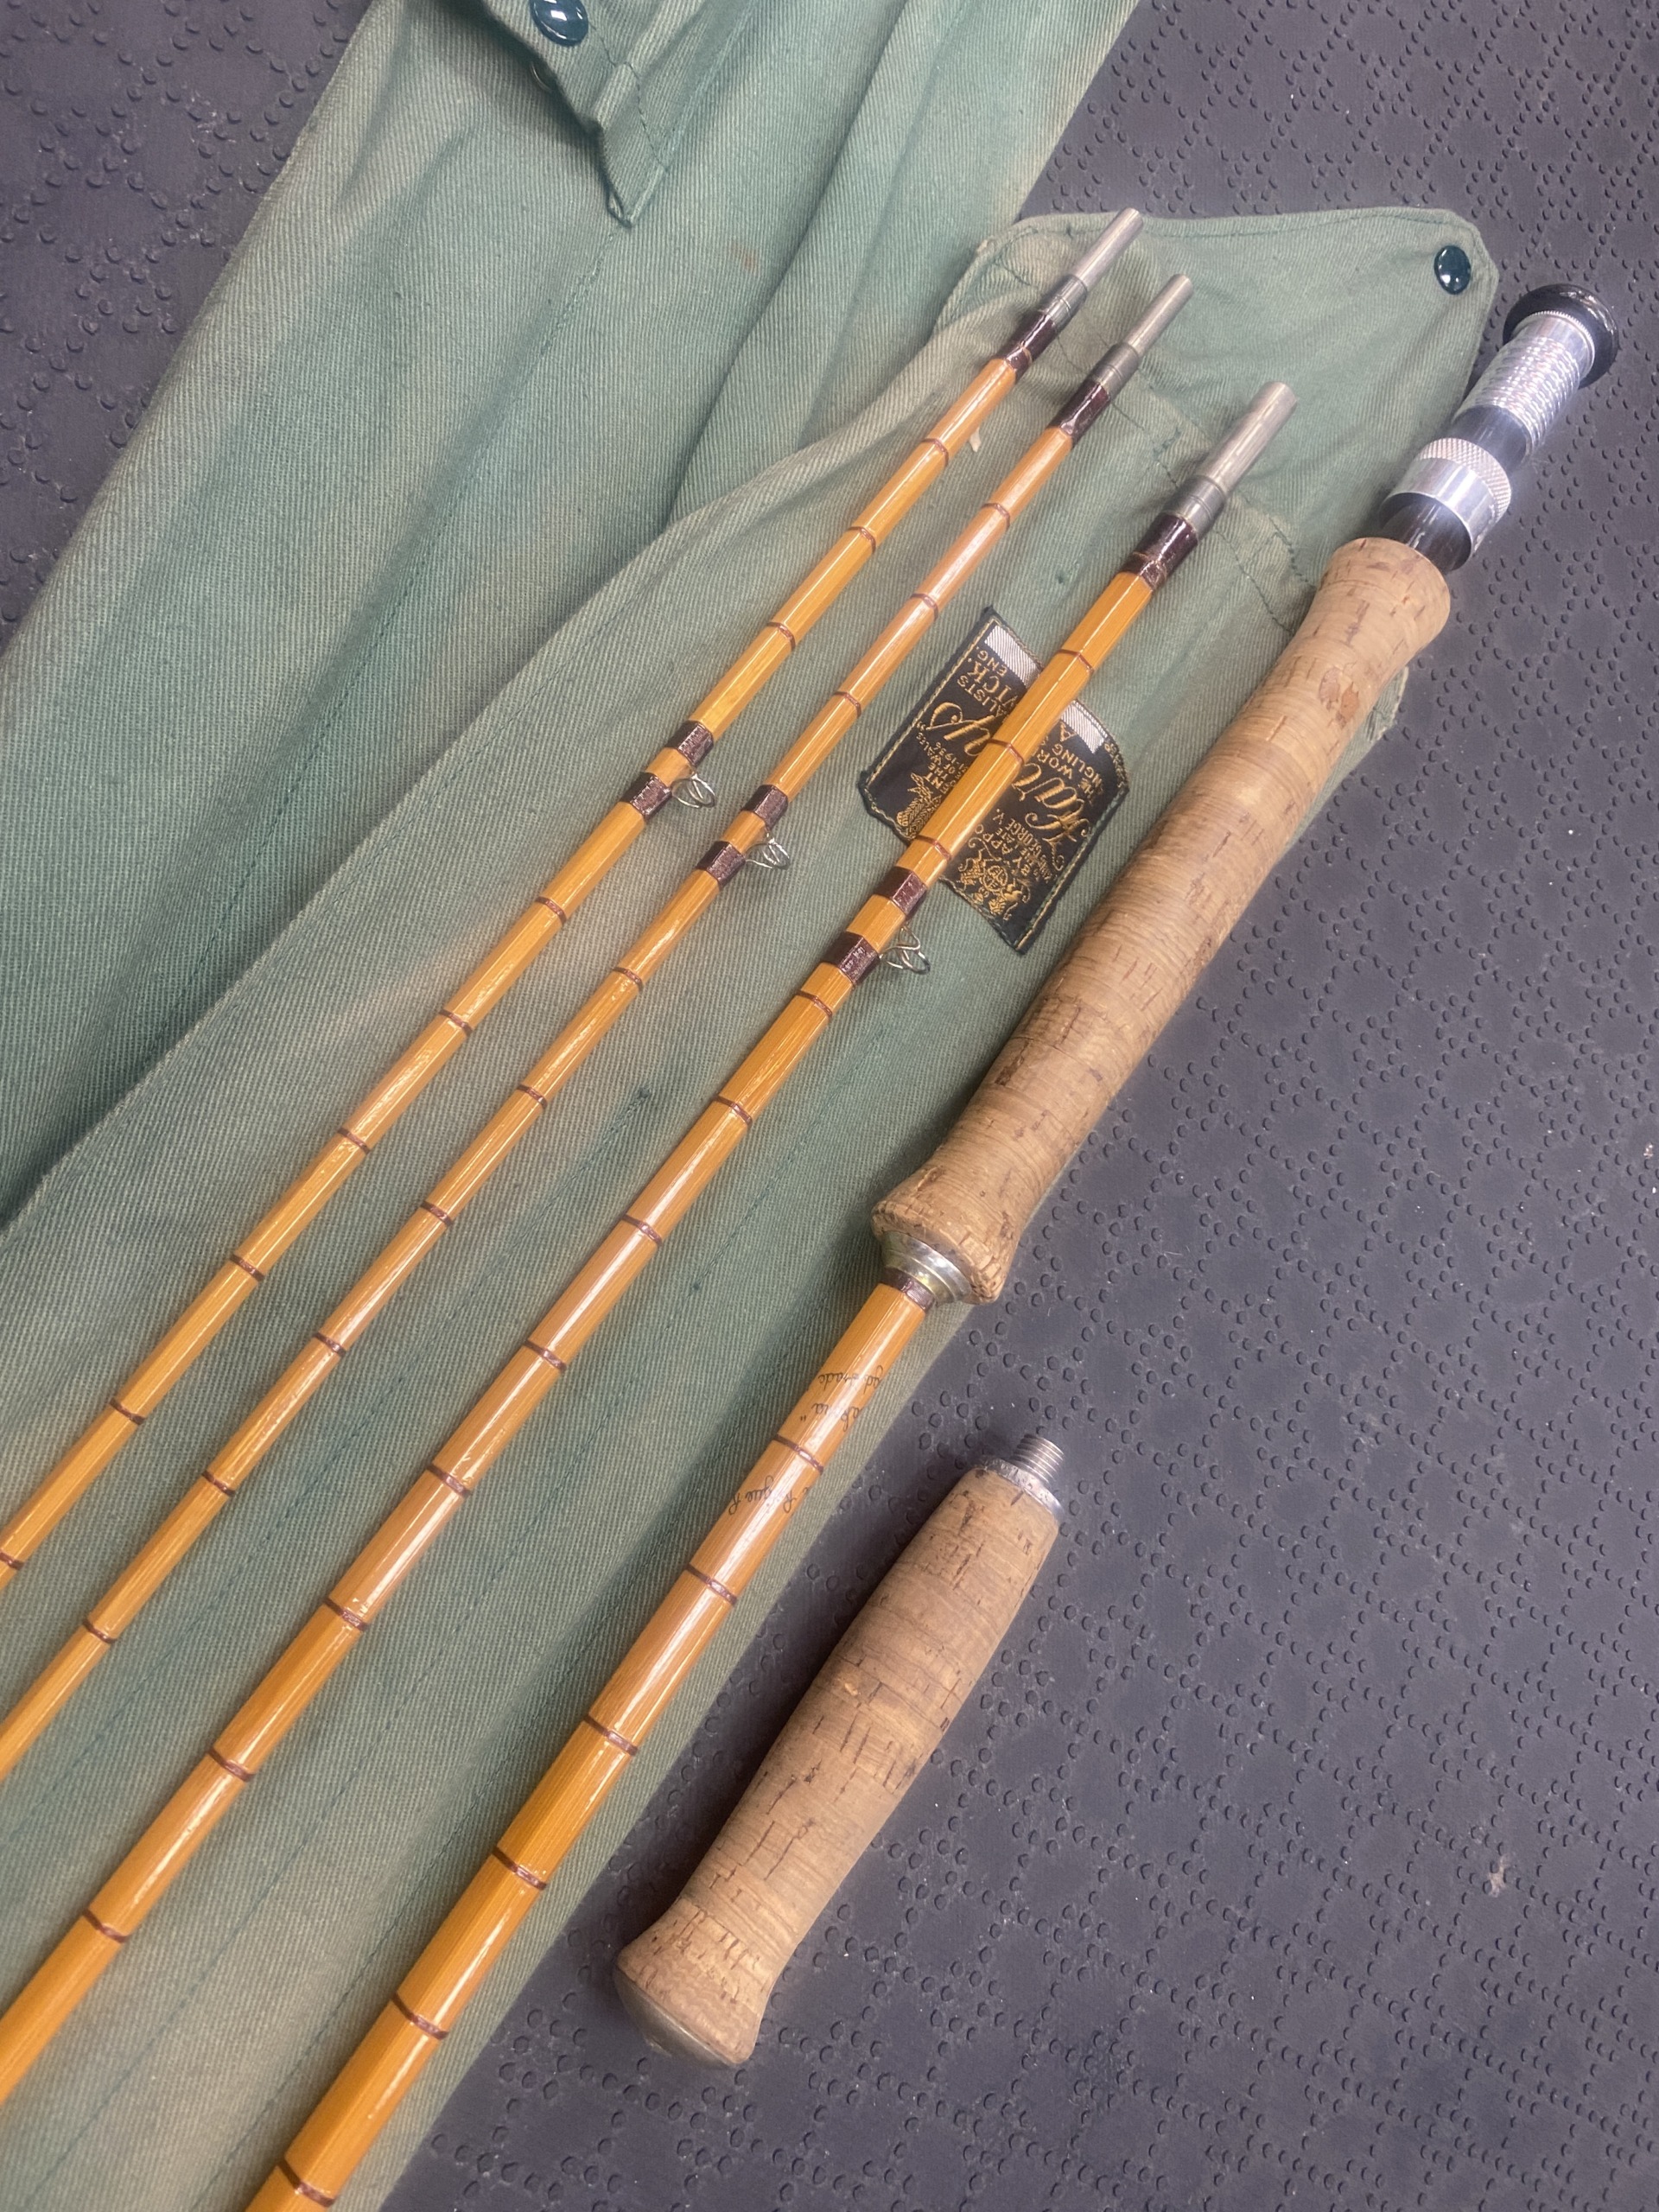 https://thefirstcast.ca/wp-content/uploads/2022/02/Hardy-9-12foot-3pc-2Tip-Rogue-River-Bamboo-Fly-Rod-A-scaled.jpg